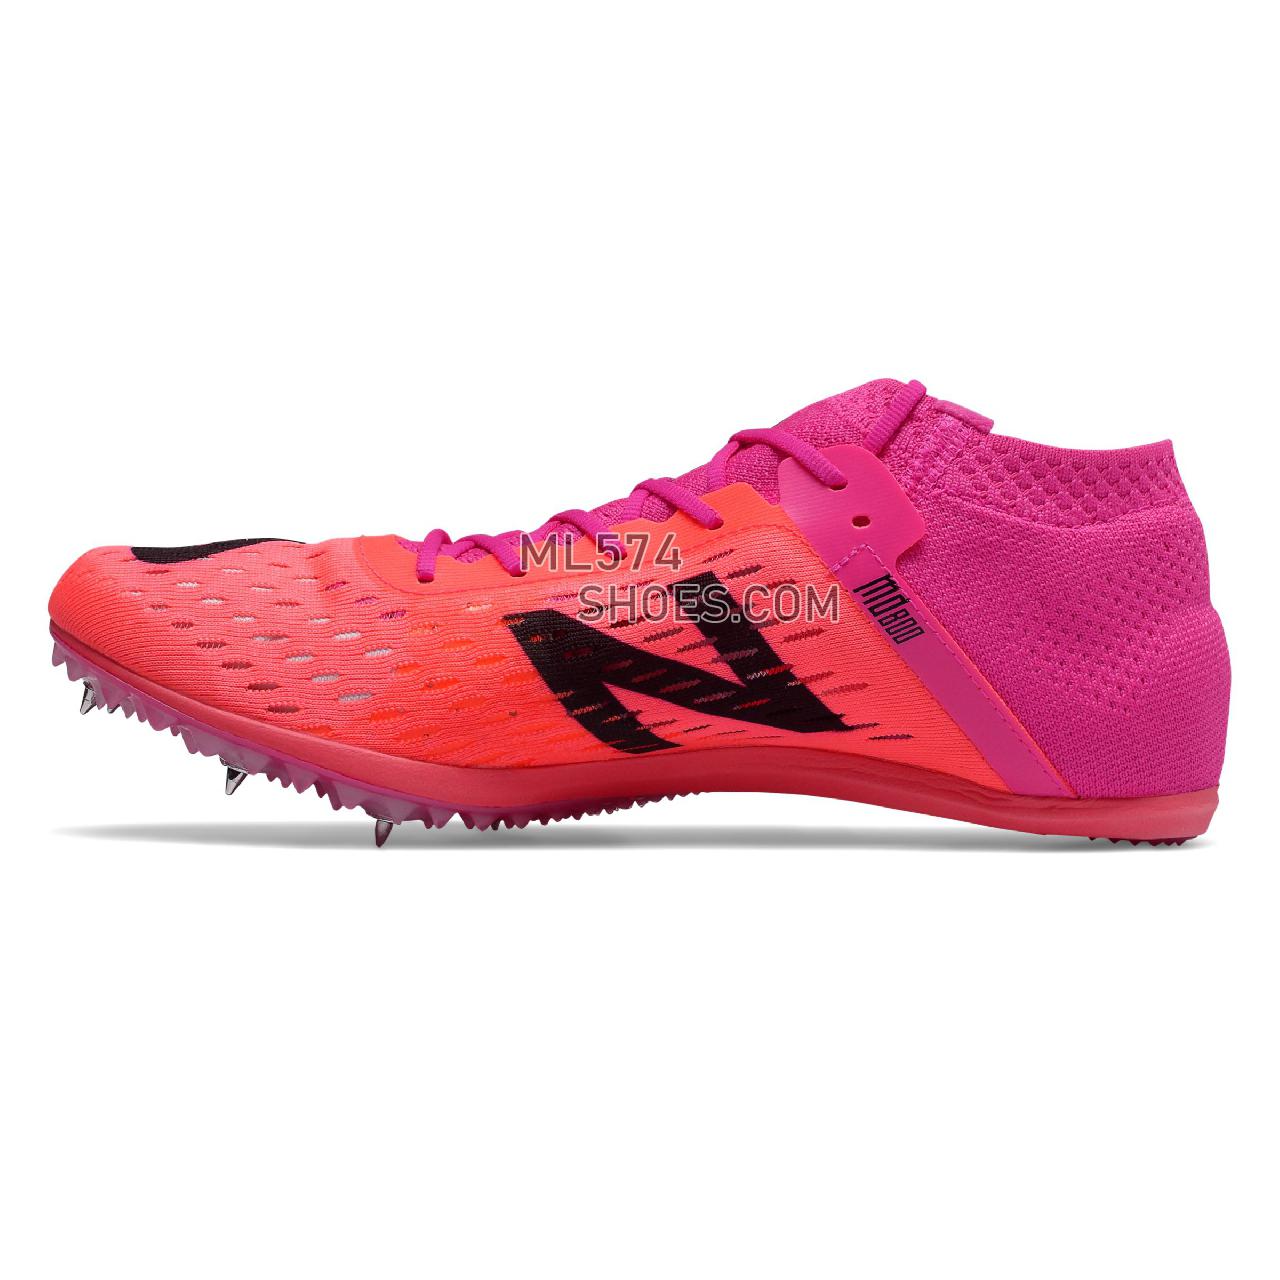 New Balance MD800v6 - Men's Race Running - Guava with Peony - UMD800P6